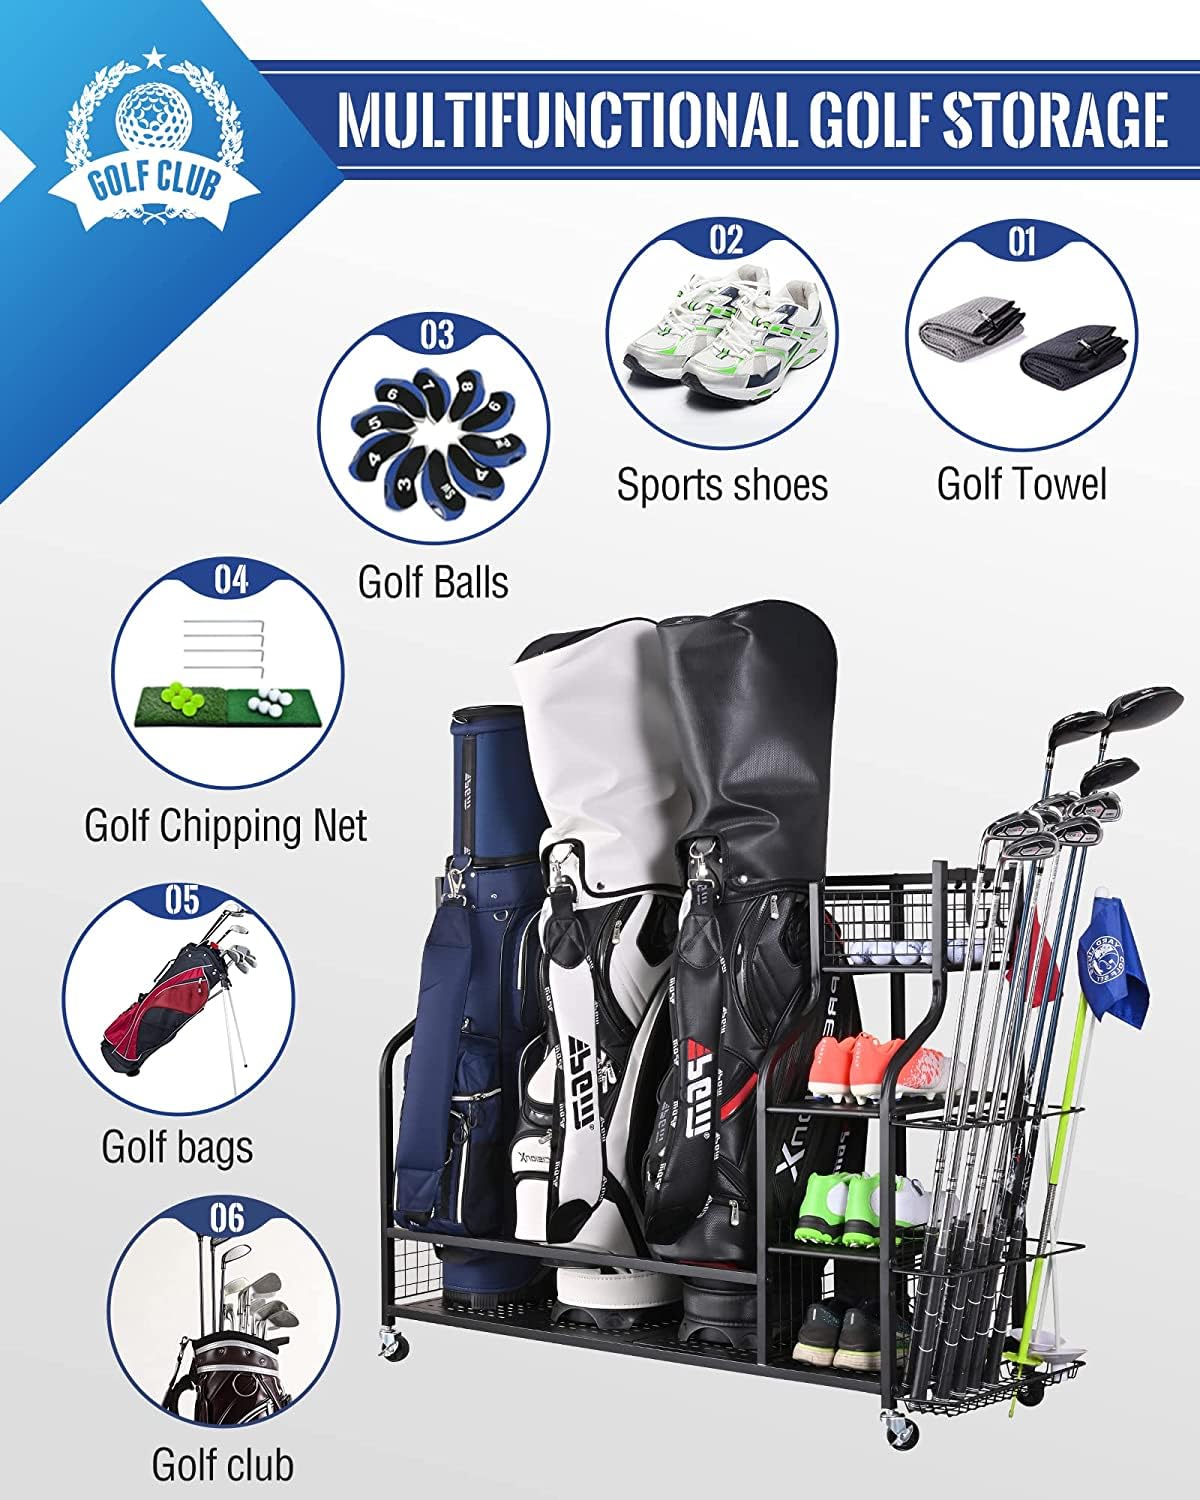 Mythinglogic 3 Golf Bags Storage Organizer-Extra Large Size Fits 3 Full Size Golf Bags With Lockable Wheels